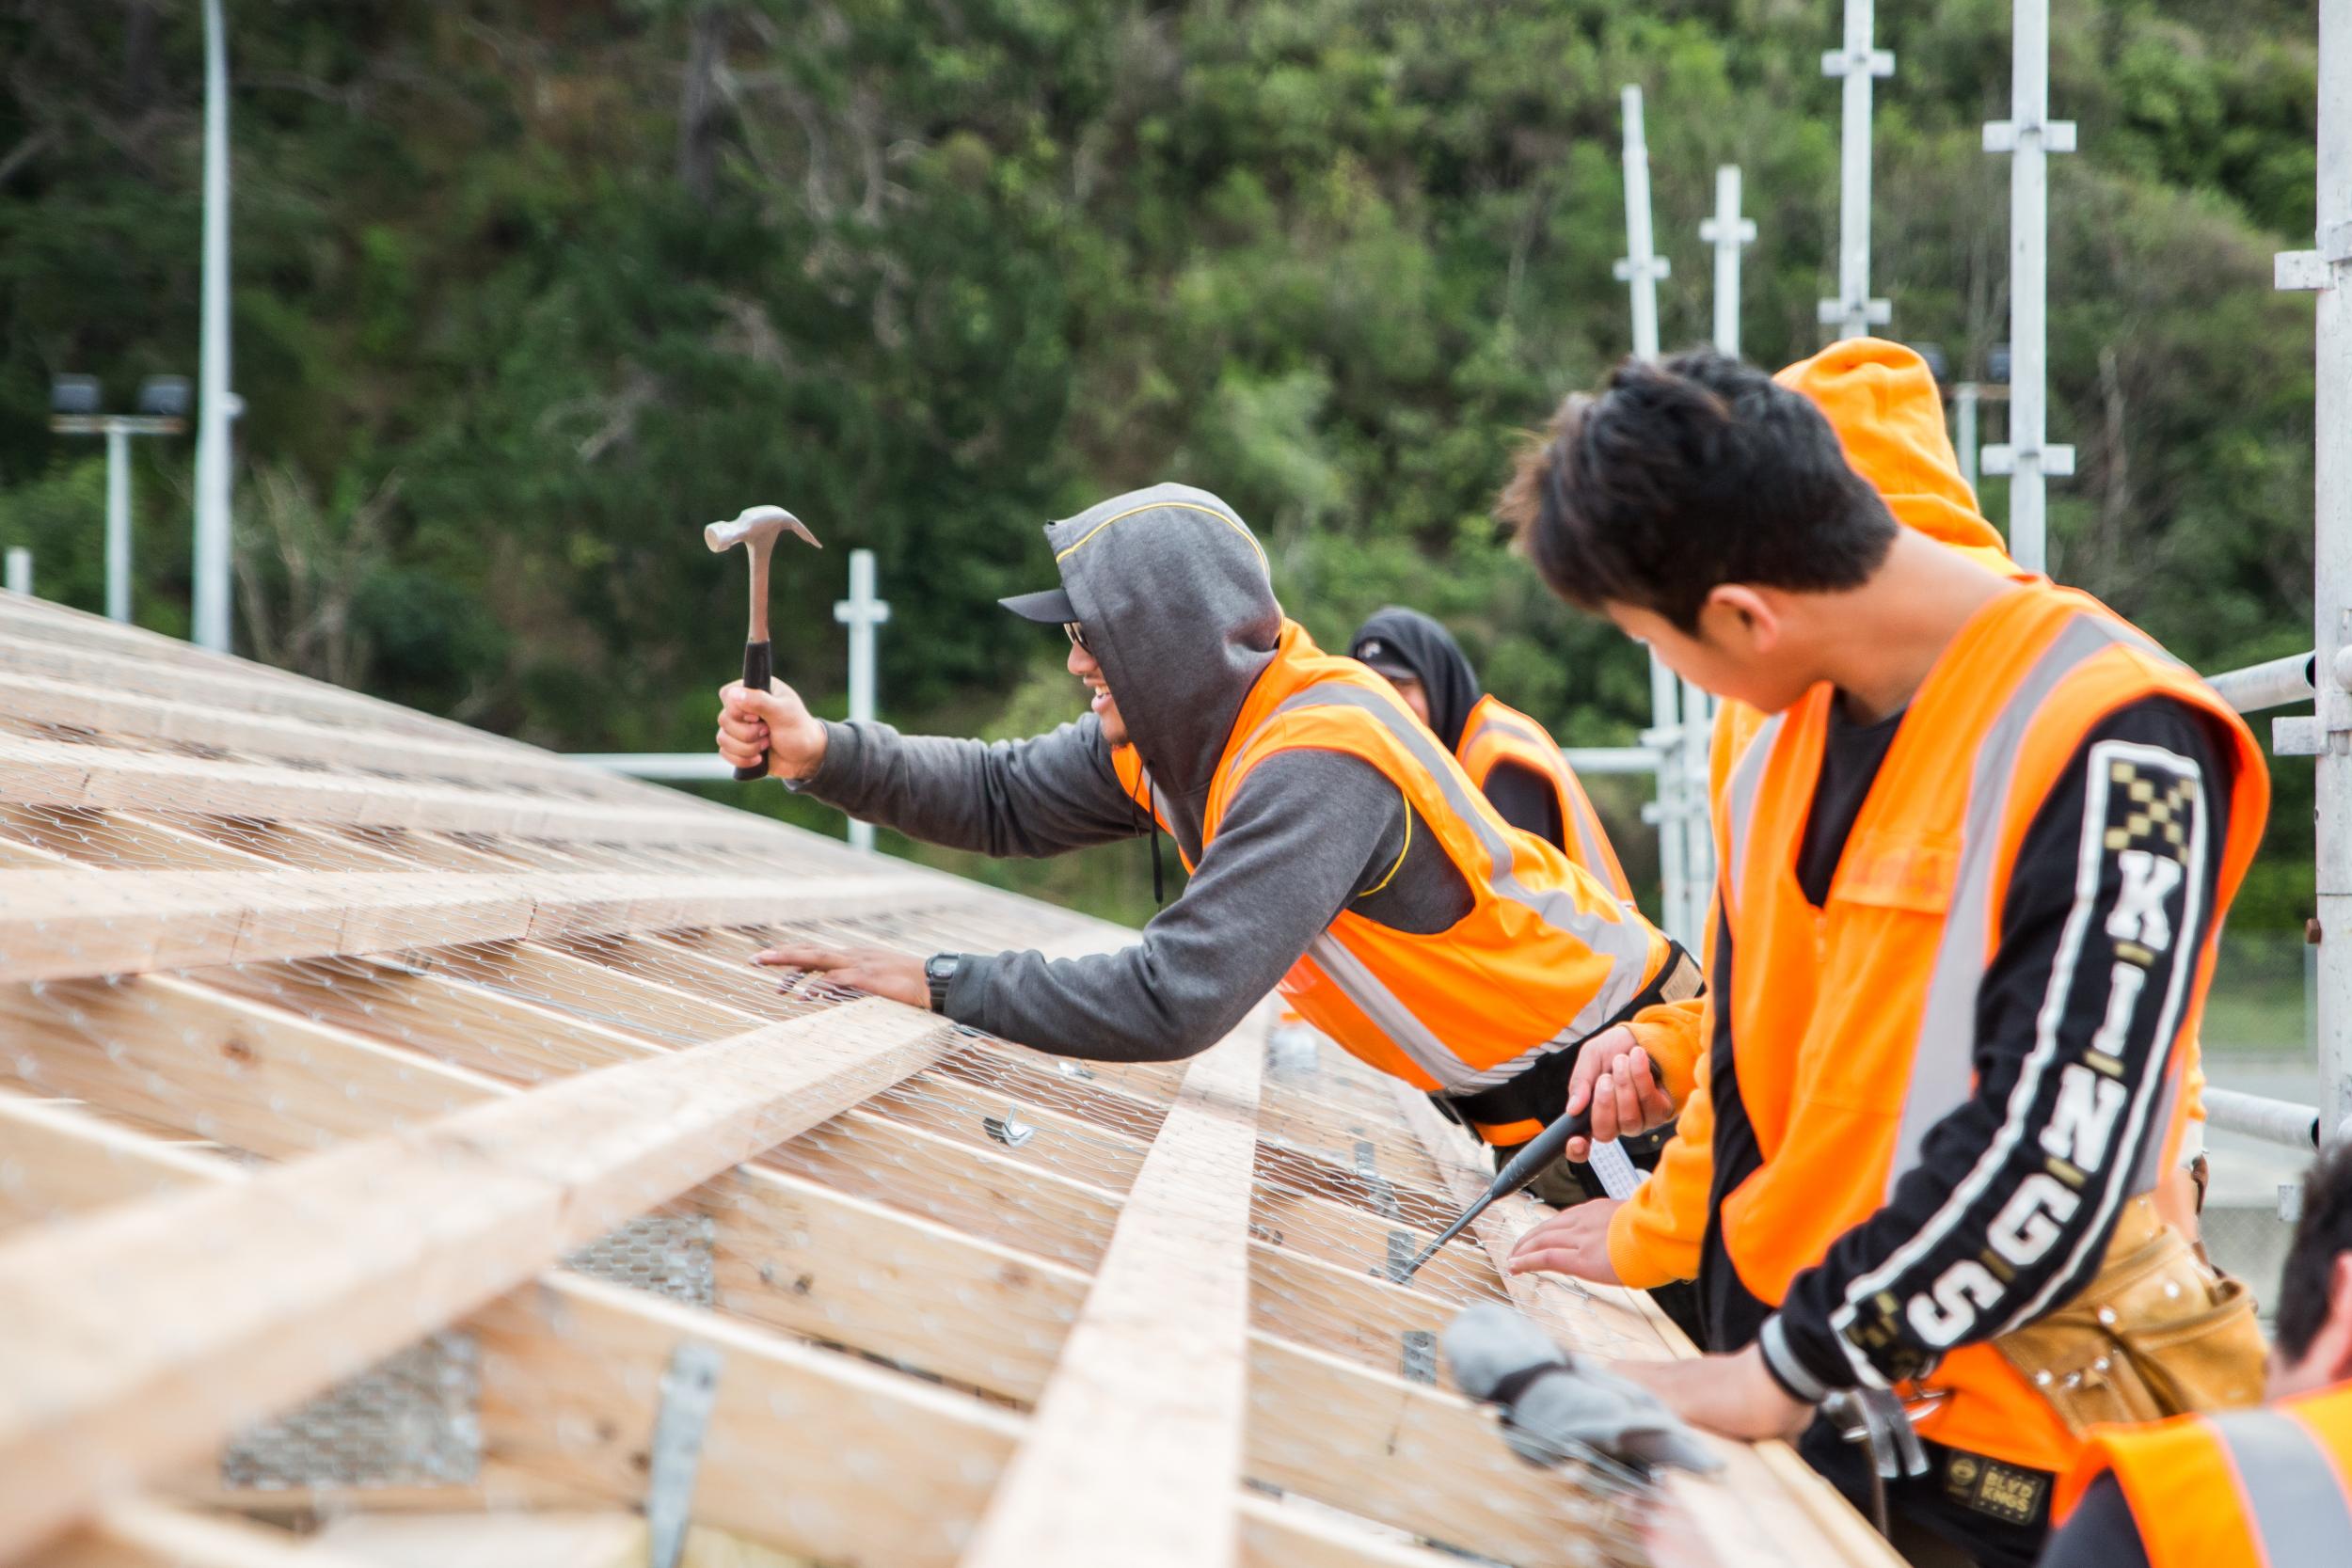 Study New Zealand Certificate in Carpentry, Programme